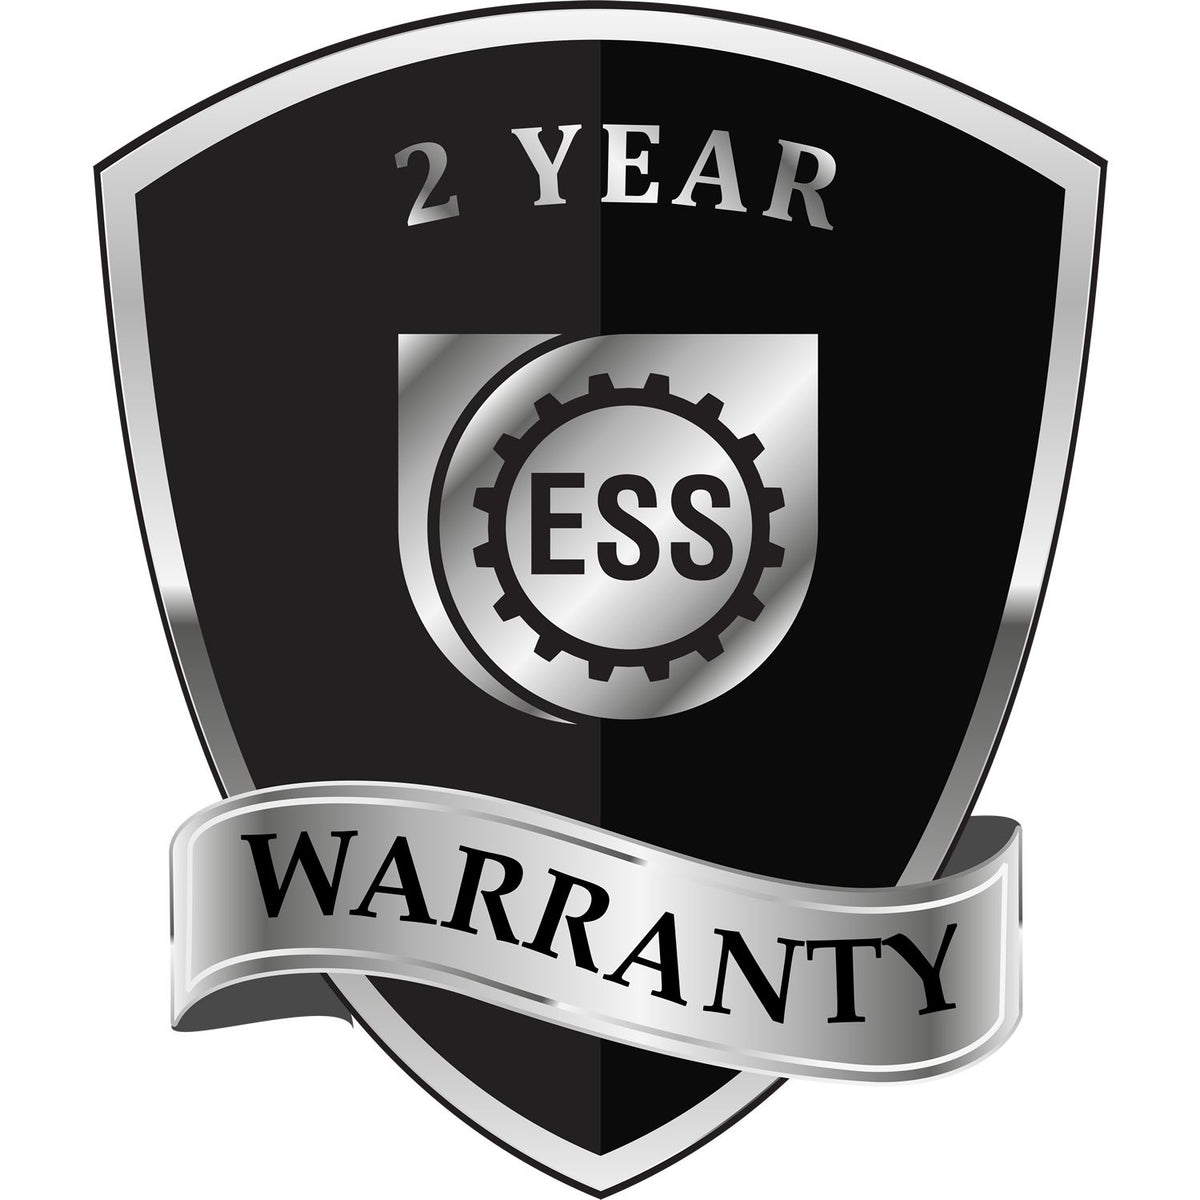 A black and silver badge or emblem showing warranty information for the Hybrid District of Columbia Land Surveyor Seal